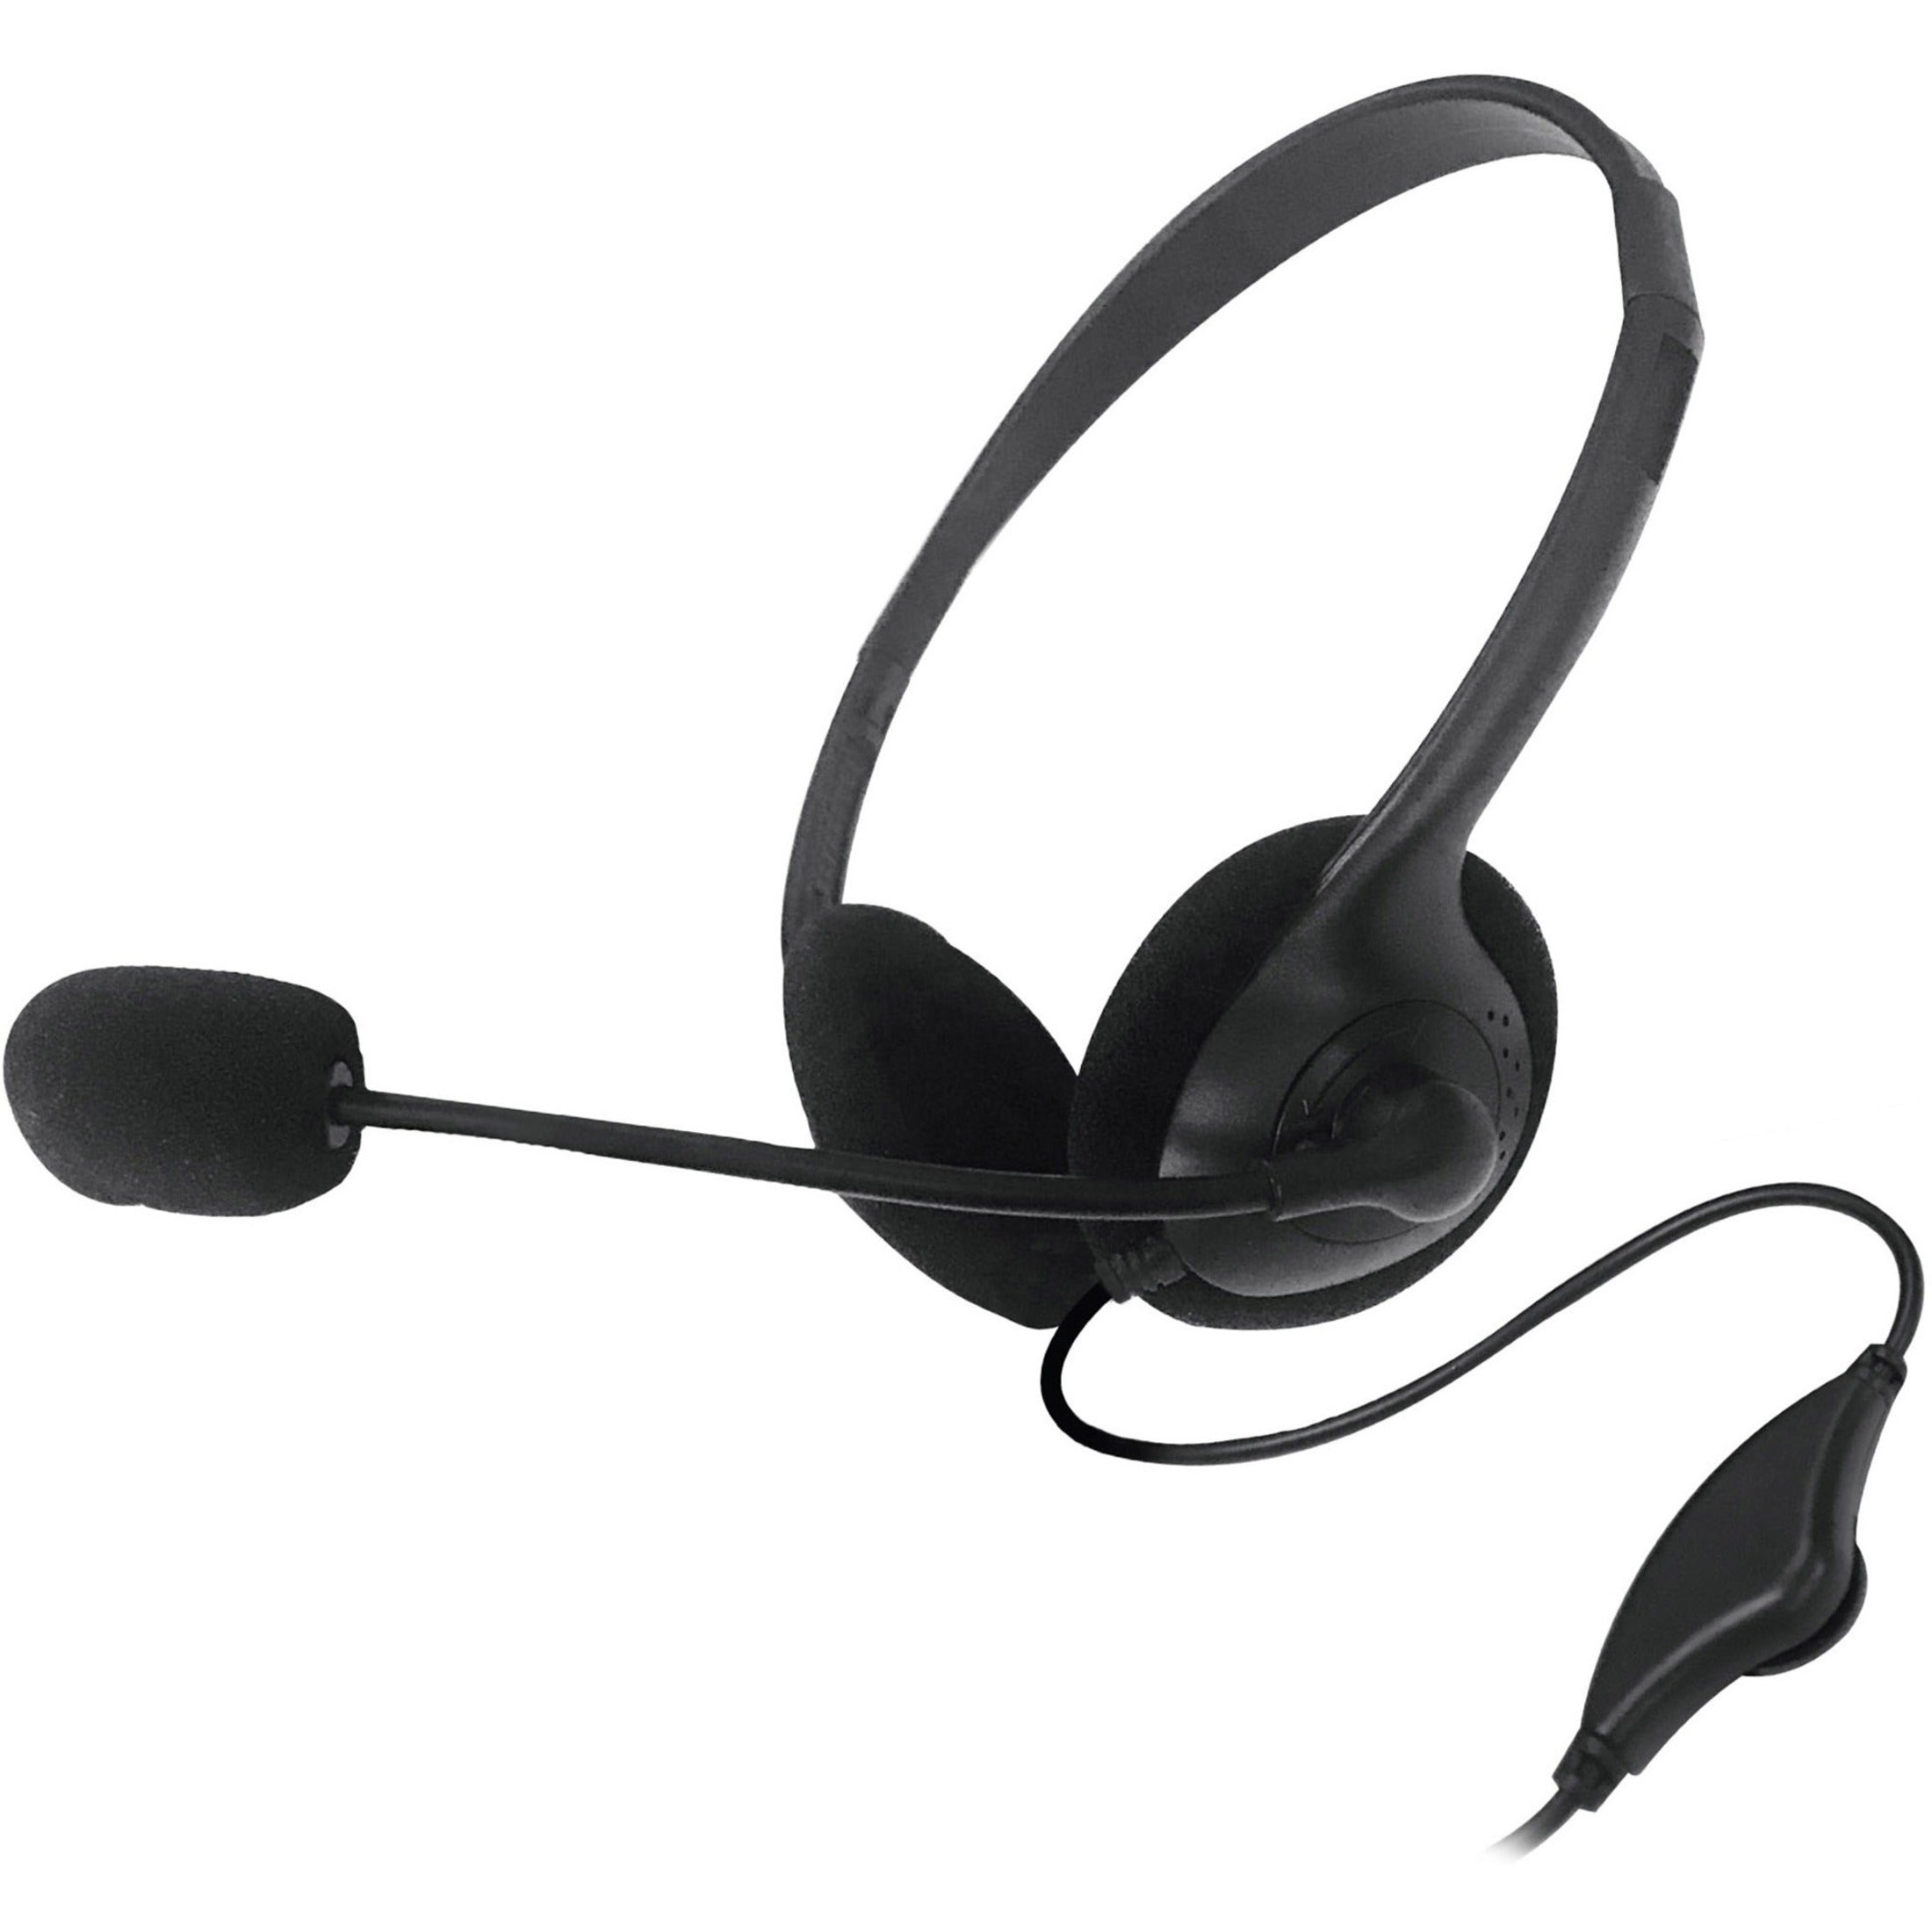 Maxell HP-BM6 199323 Headset - Stereo - USB - Wired - Binaural - Black [Discontinued]